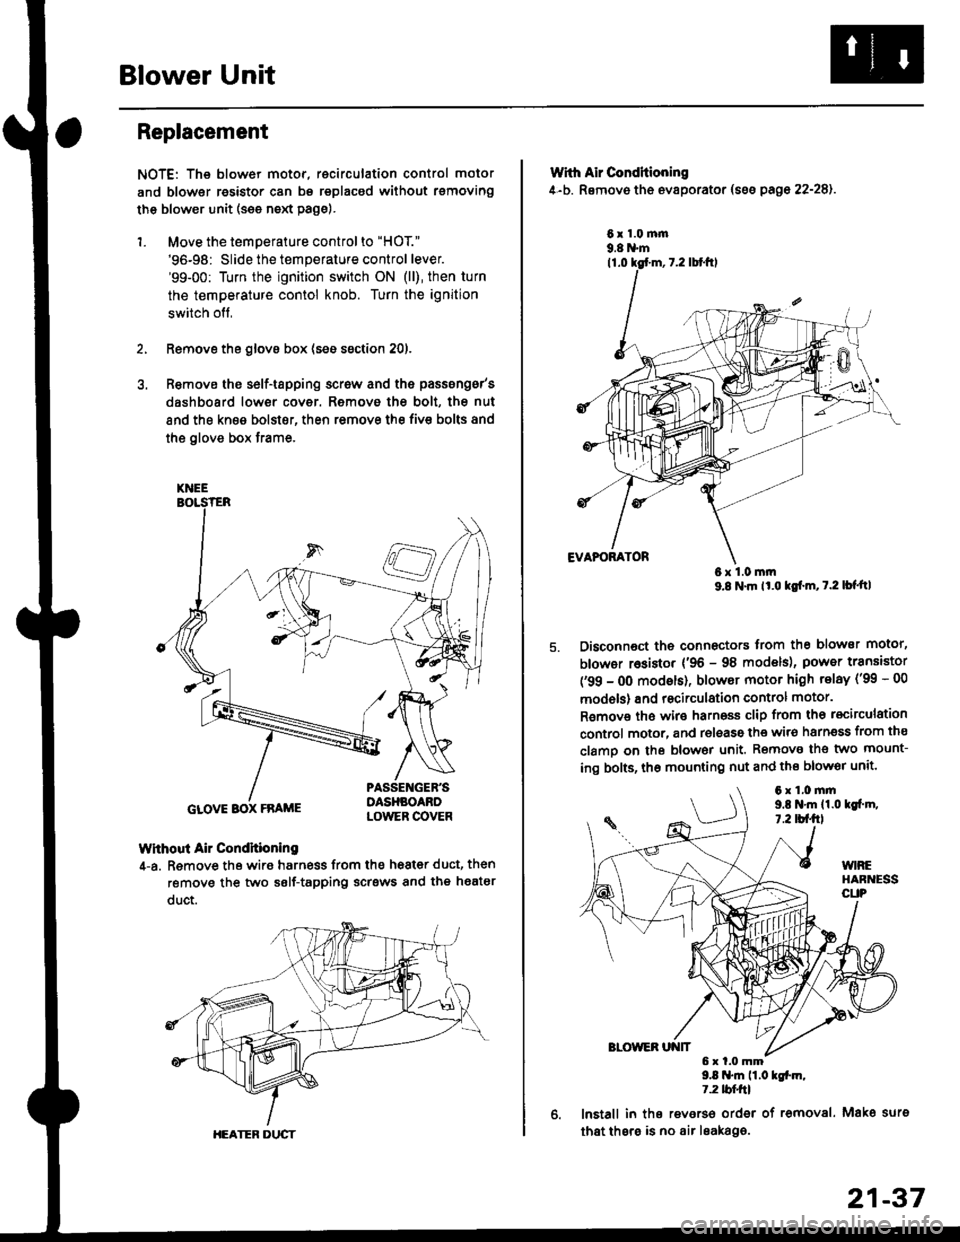 HONDA CIVIC 1998 6.G Owners Guide Blower Unit
Replacement
NOTE: The blower motor, recirculation control motor
and blower resistor can bs replacsd without rsmoving
th€ blower unit (see neld Page).
1. Move the temperature control to "